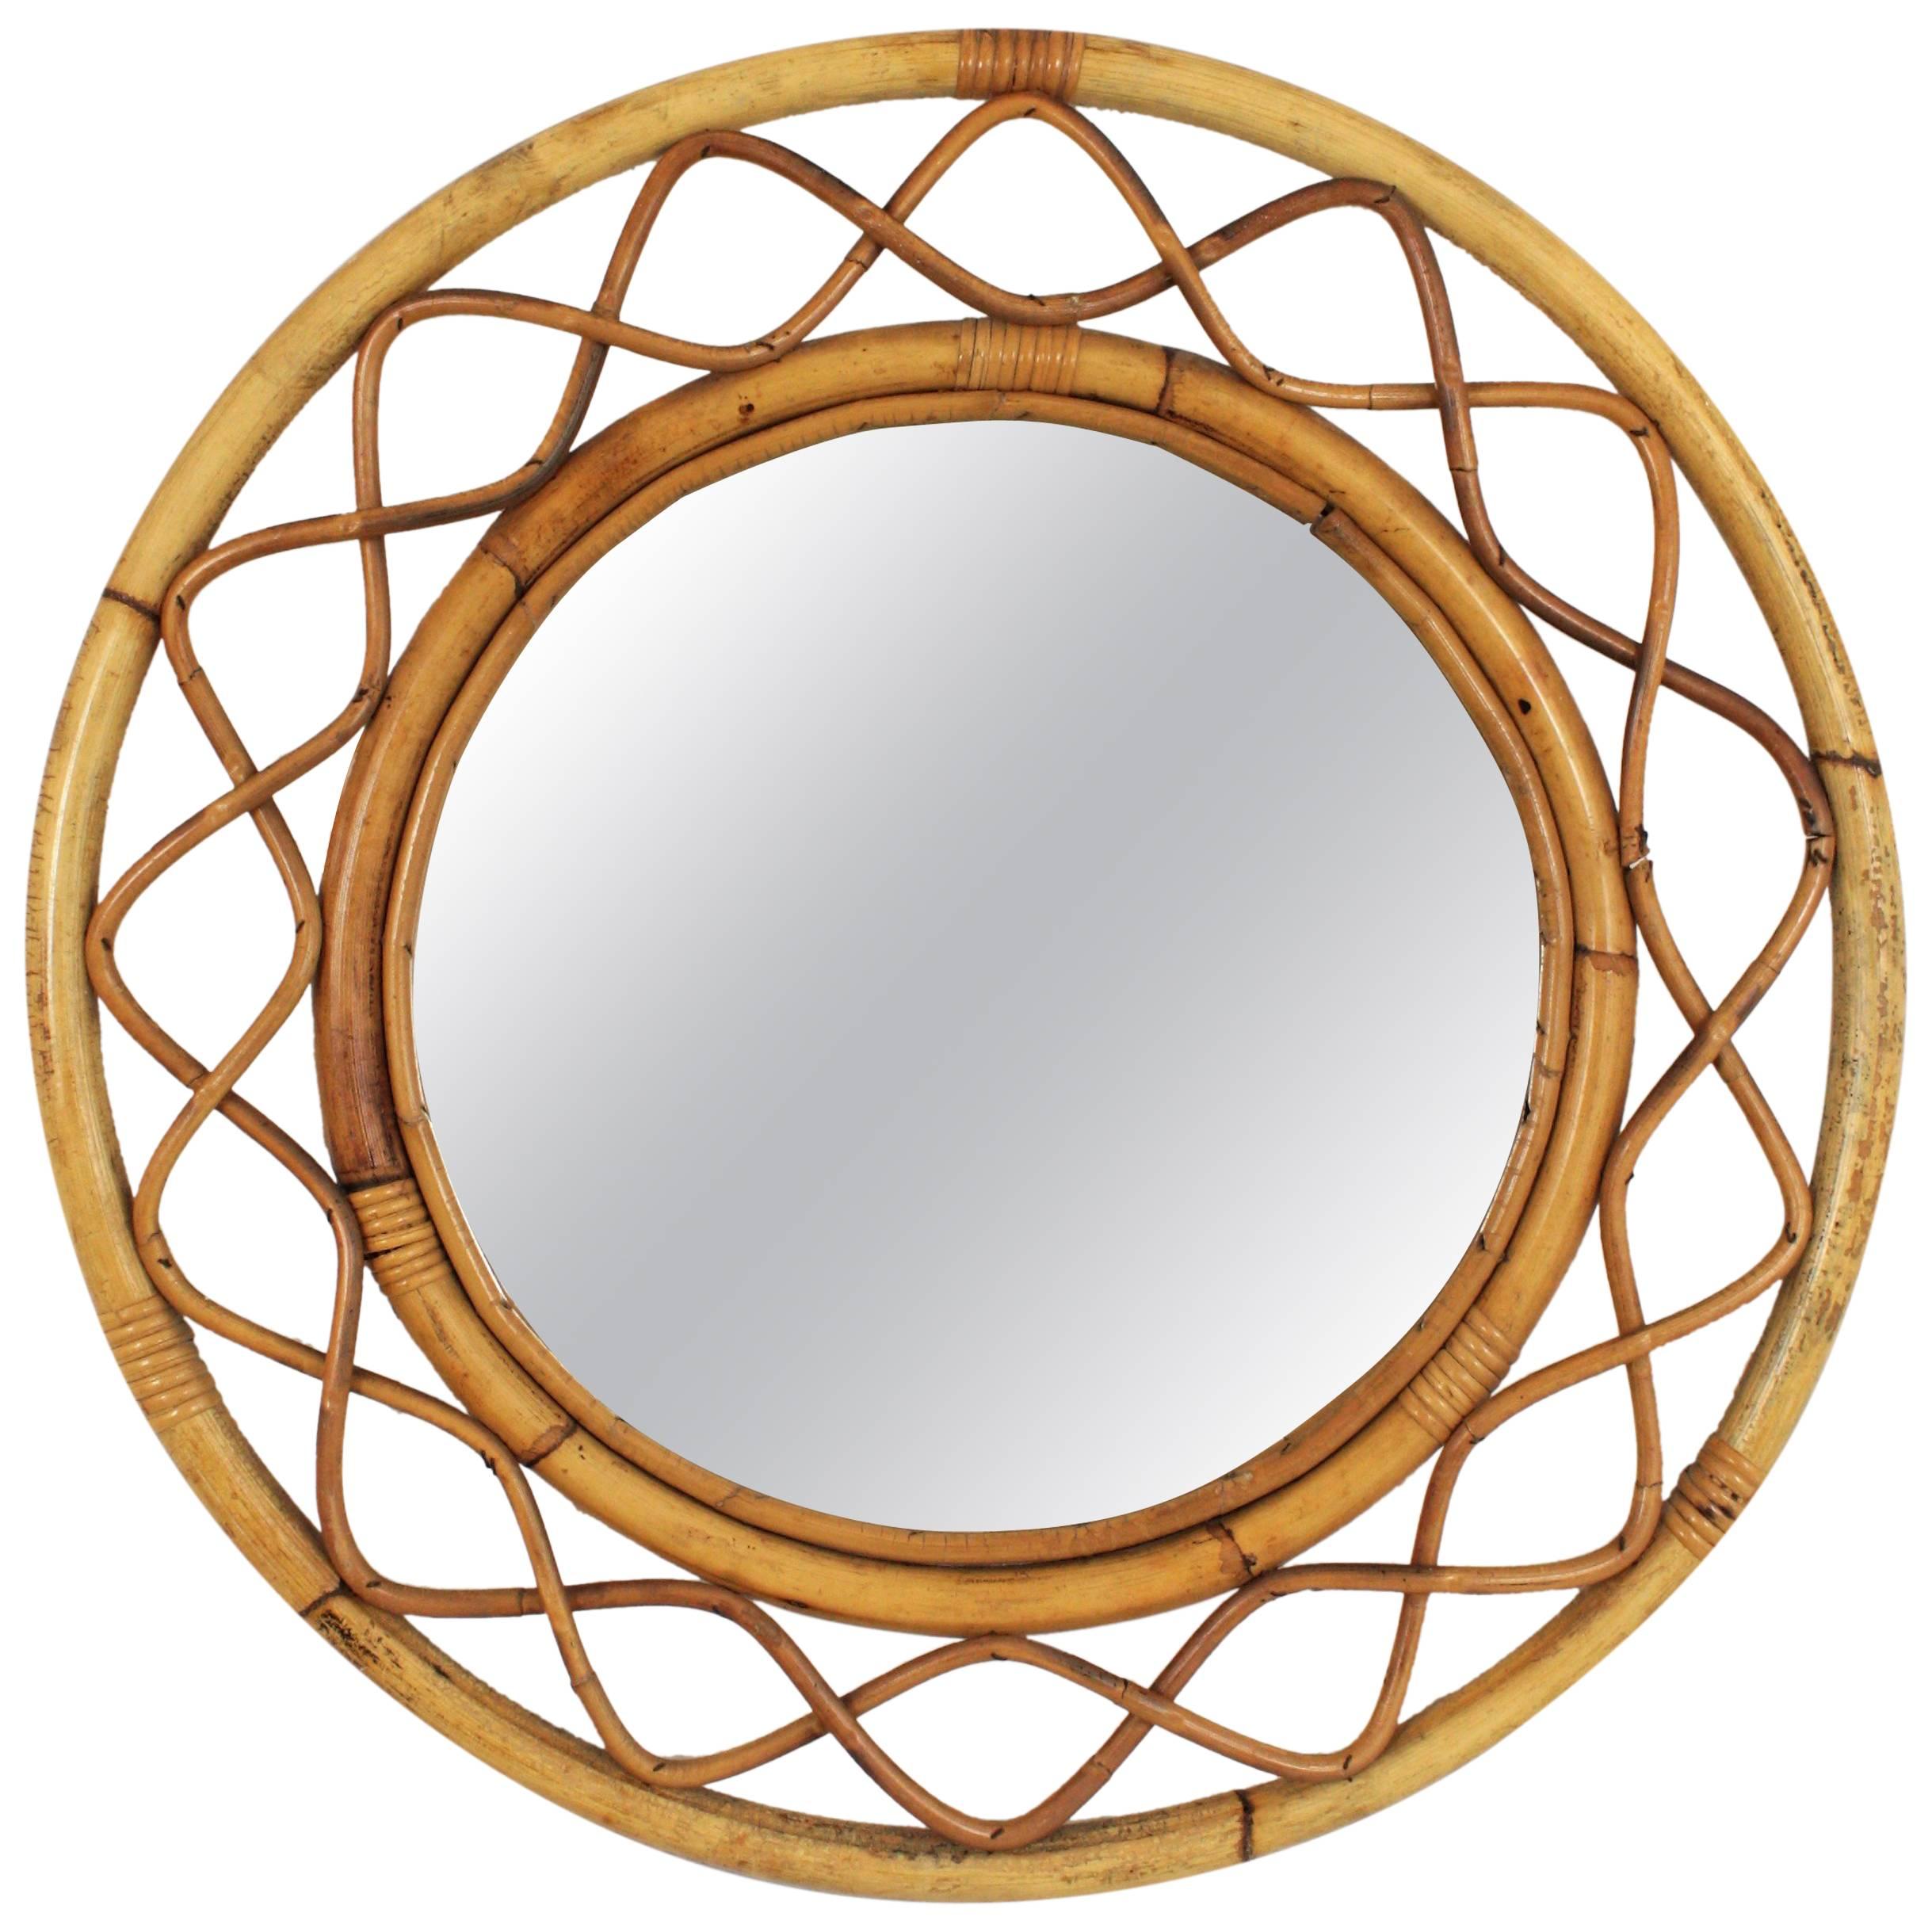 1960s Jean Royère Style French Riviera Bamboo and Rattan Round Mirror